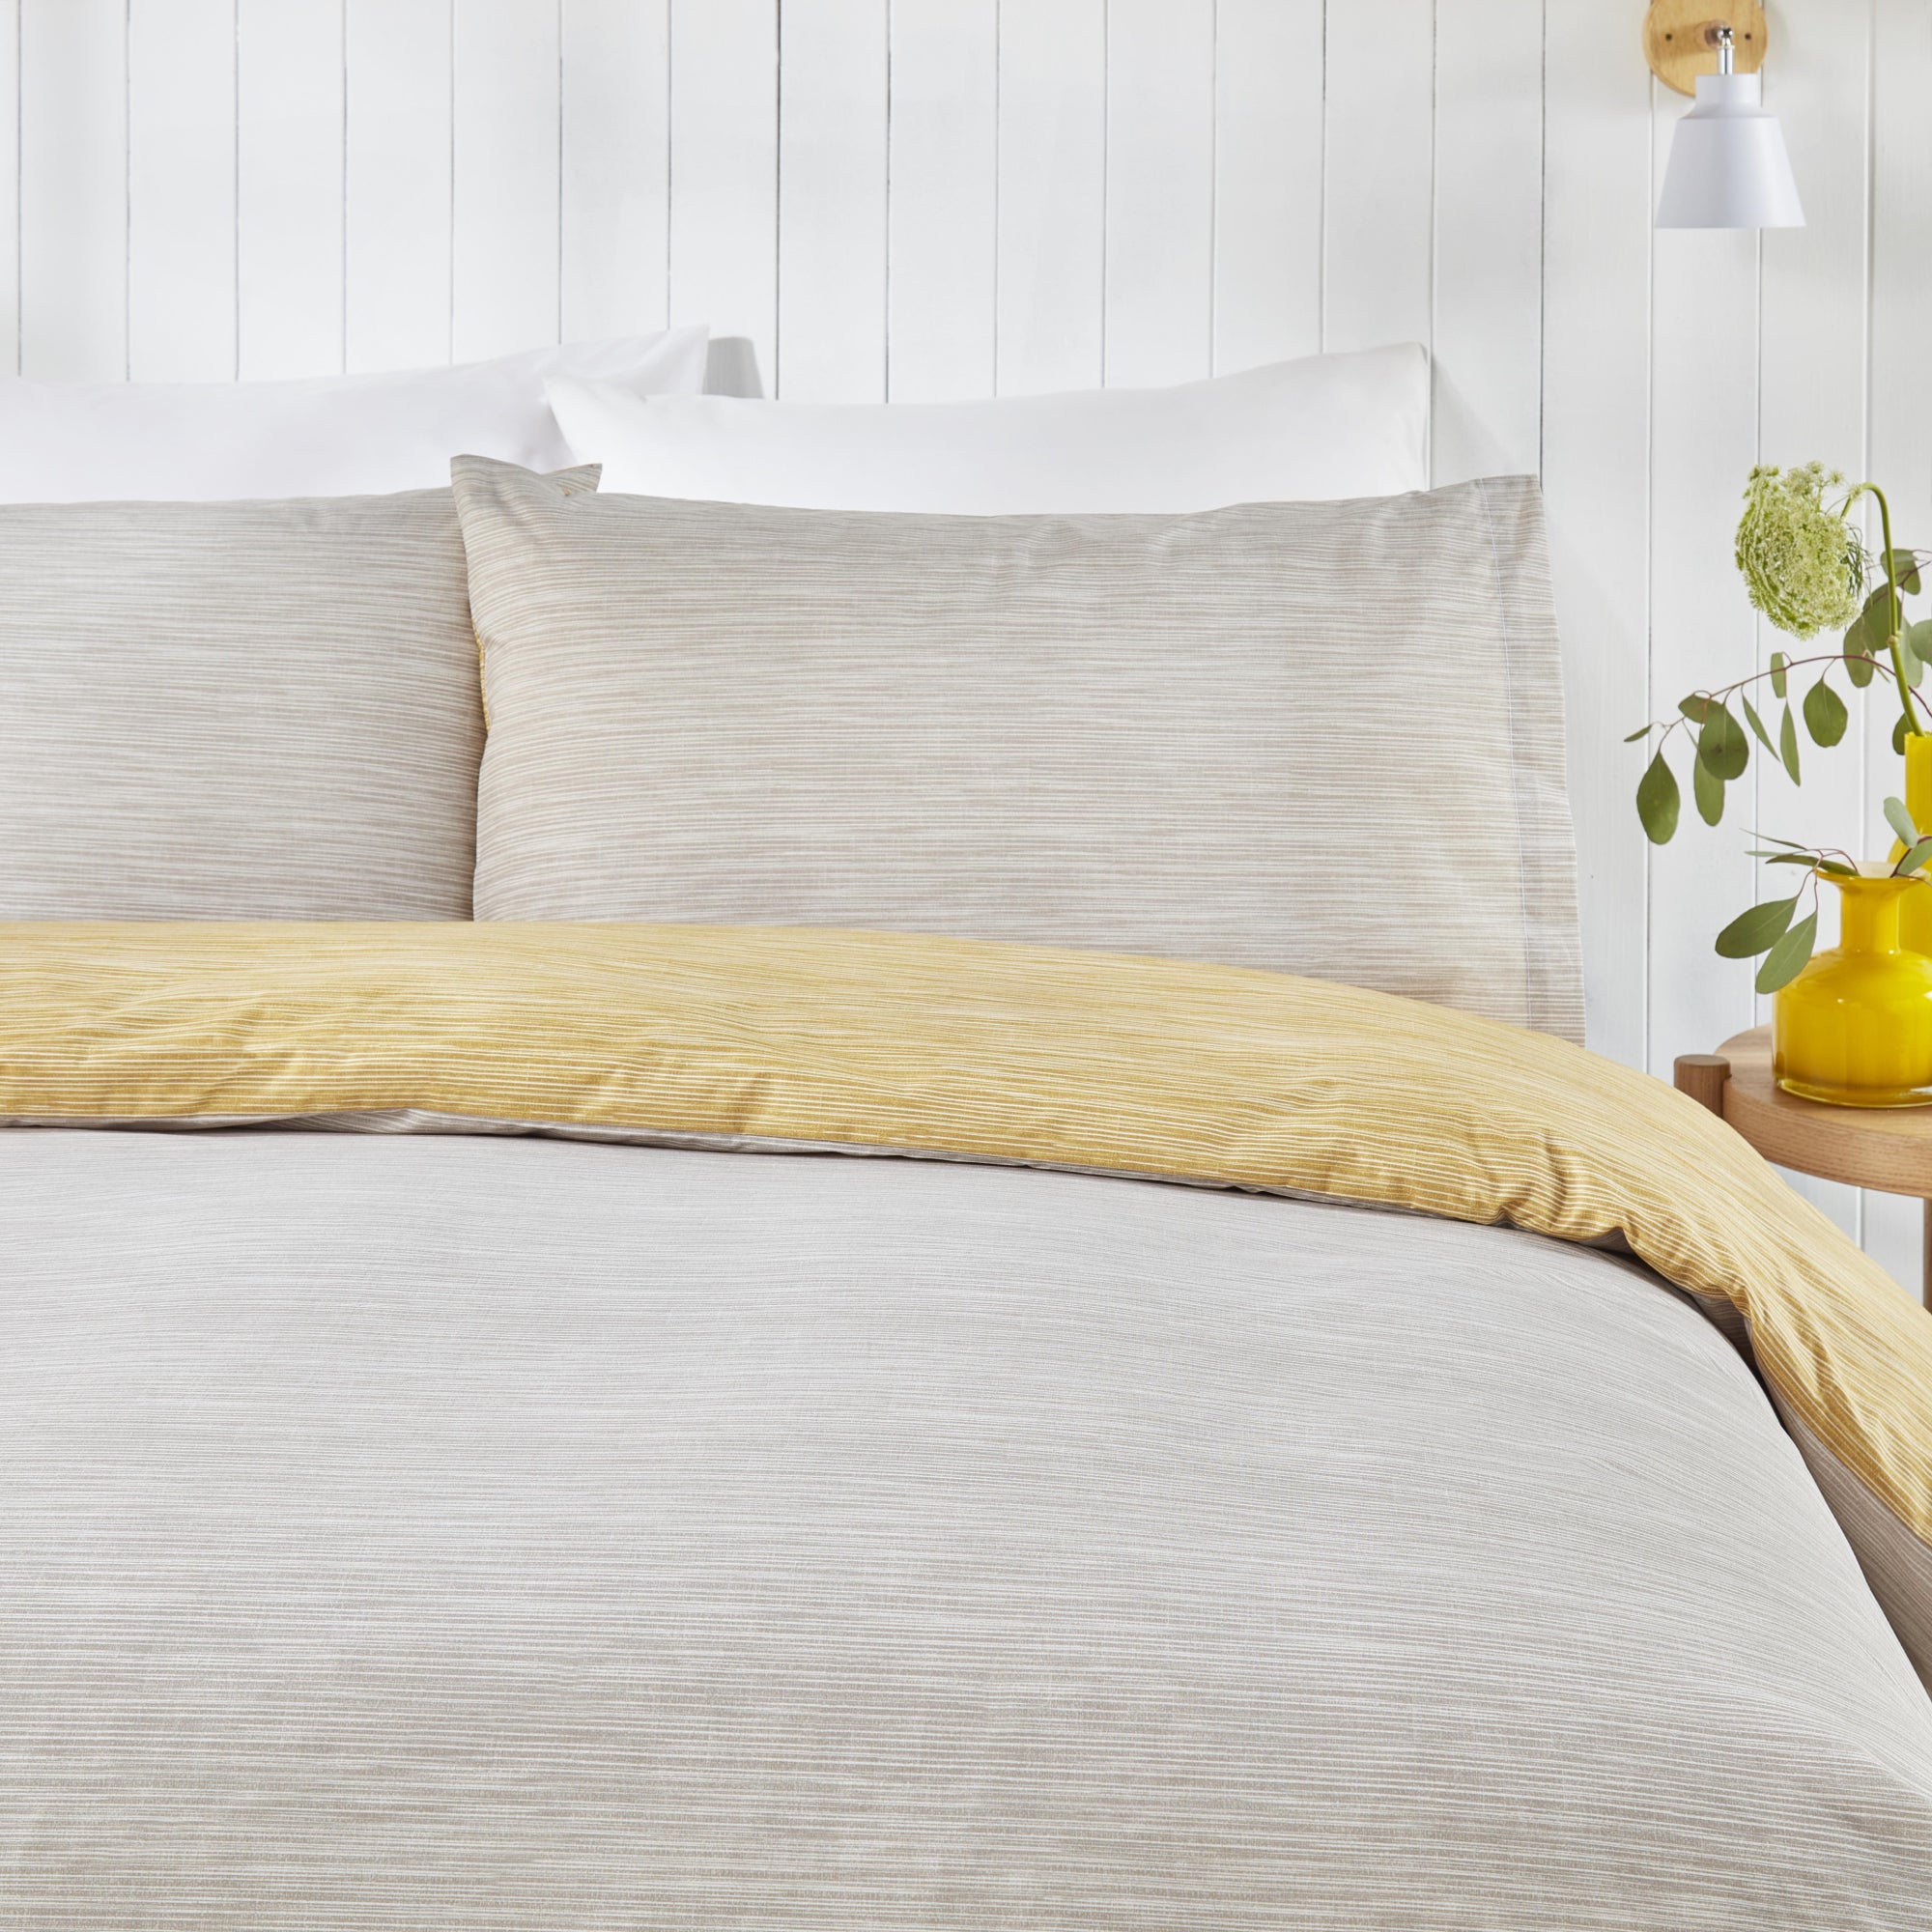 Duvet Cover Set Bethan by Fusion in Ochre/Natural